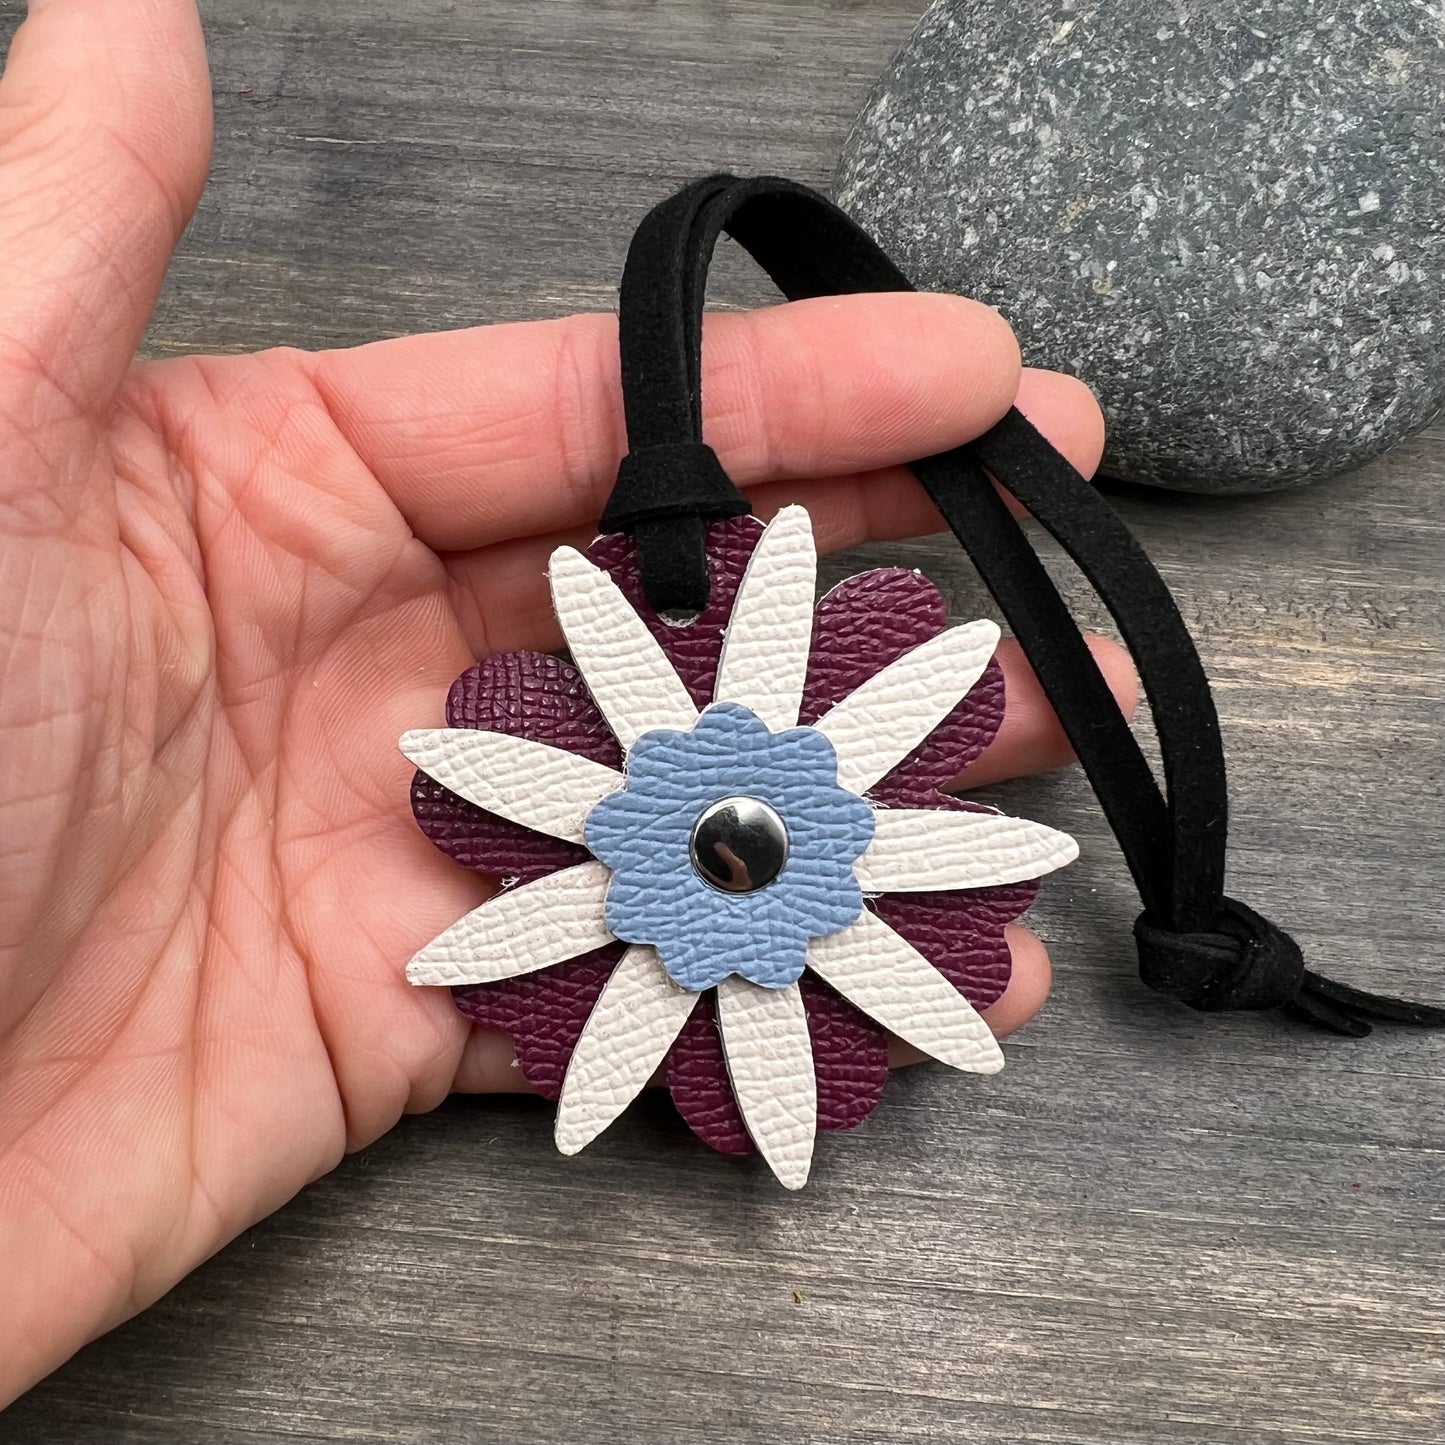 Small Leather Flower Purse Charm - Deep Pink, Blue and White